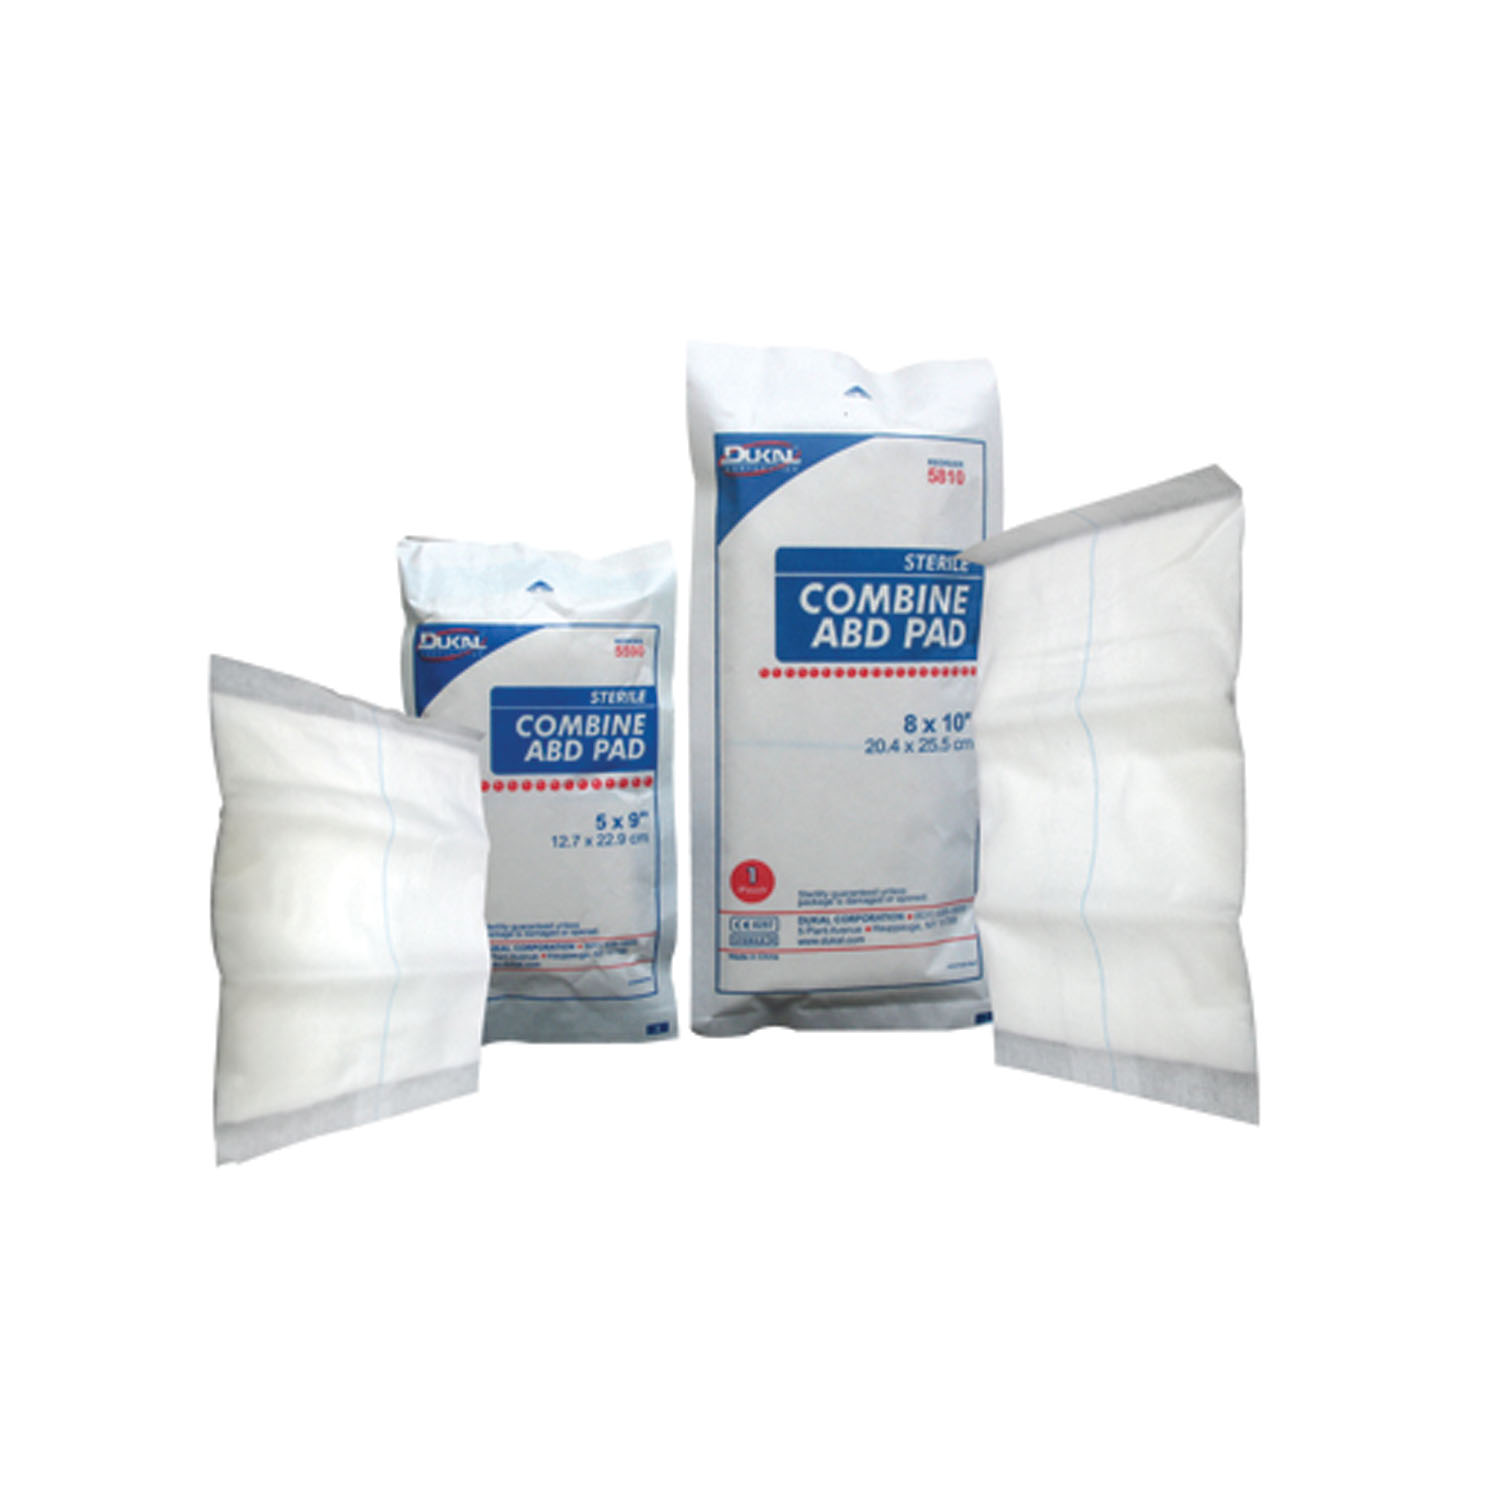 DUKAL ABD PADS : 5810 TR $9.27 Stocked